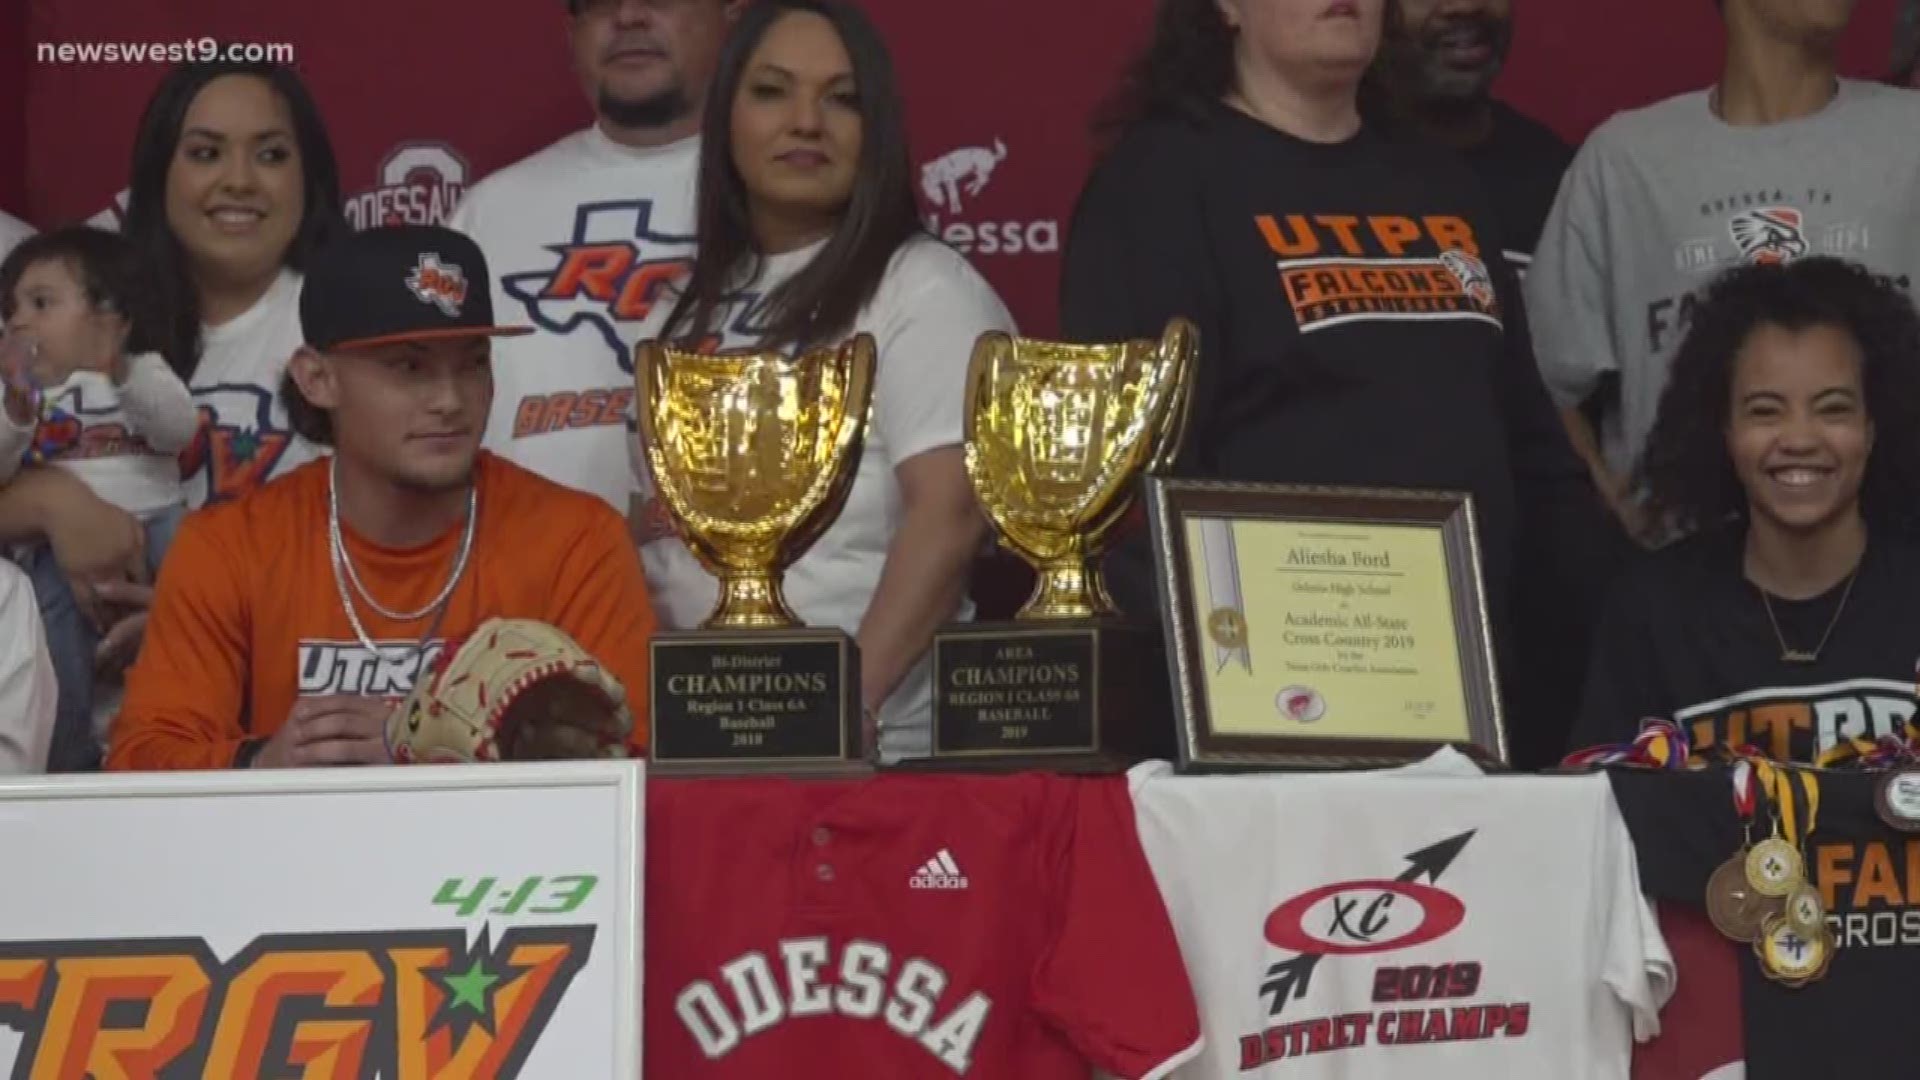 Aleisha Ford head to UT Permian Basin for cross country and Gibrian Pena will attend UT Rio Grande Valley for baseball.